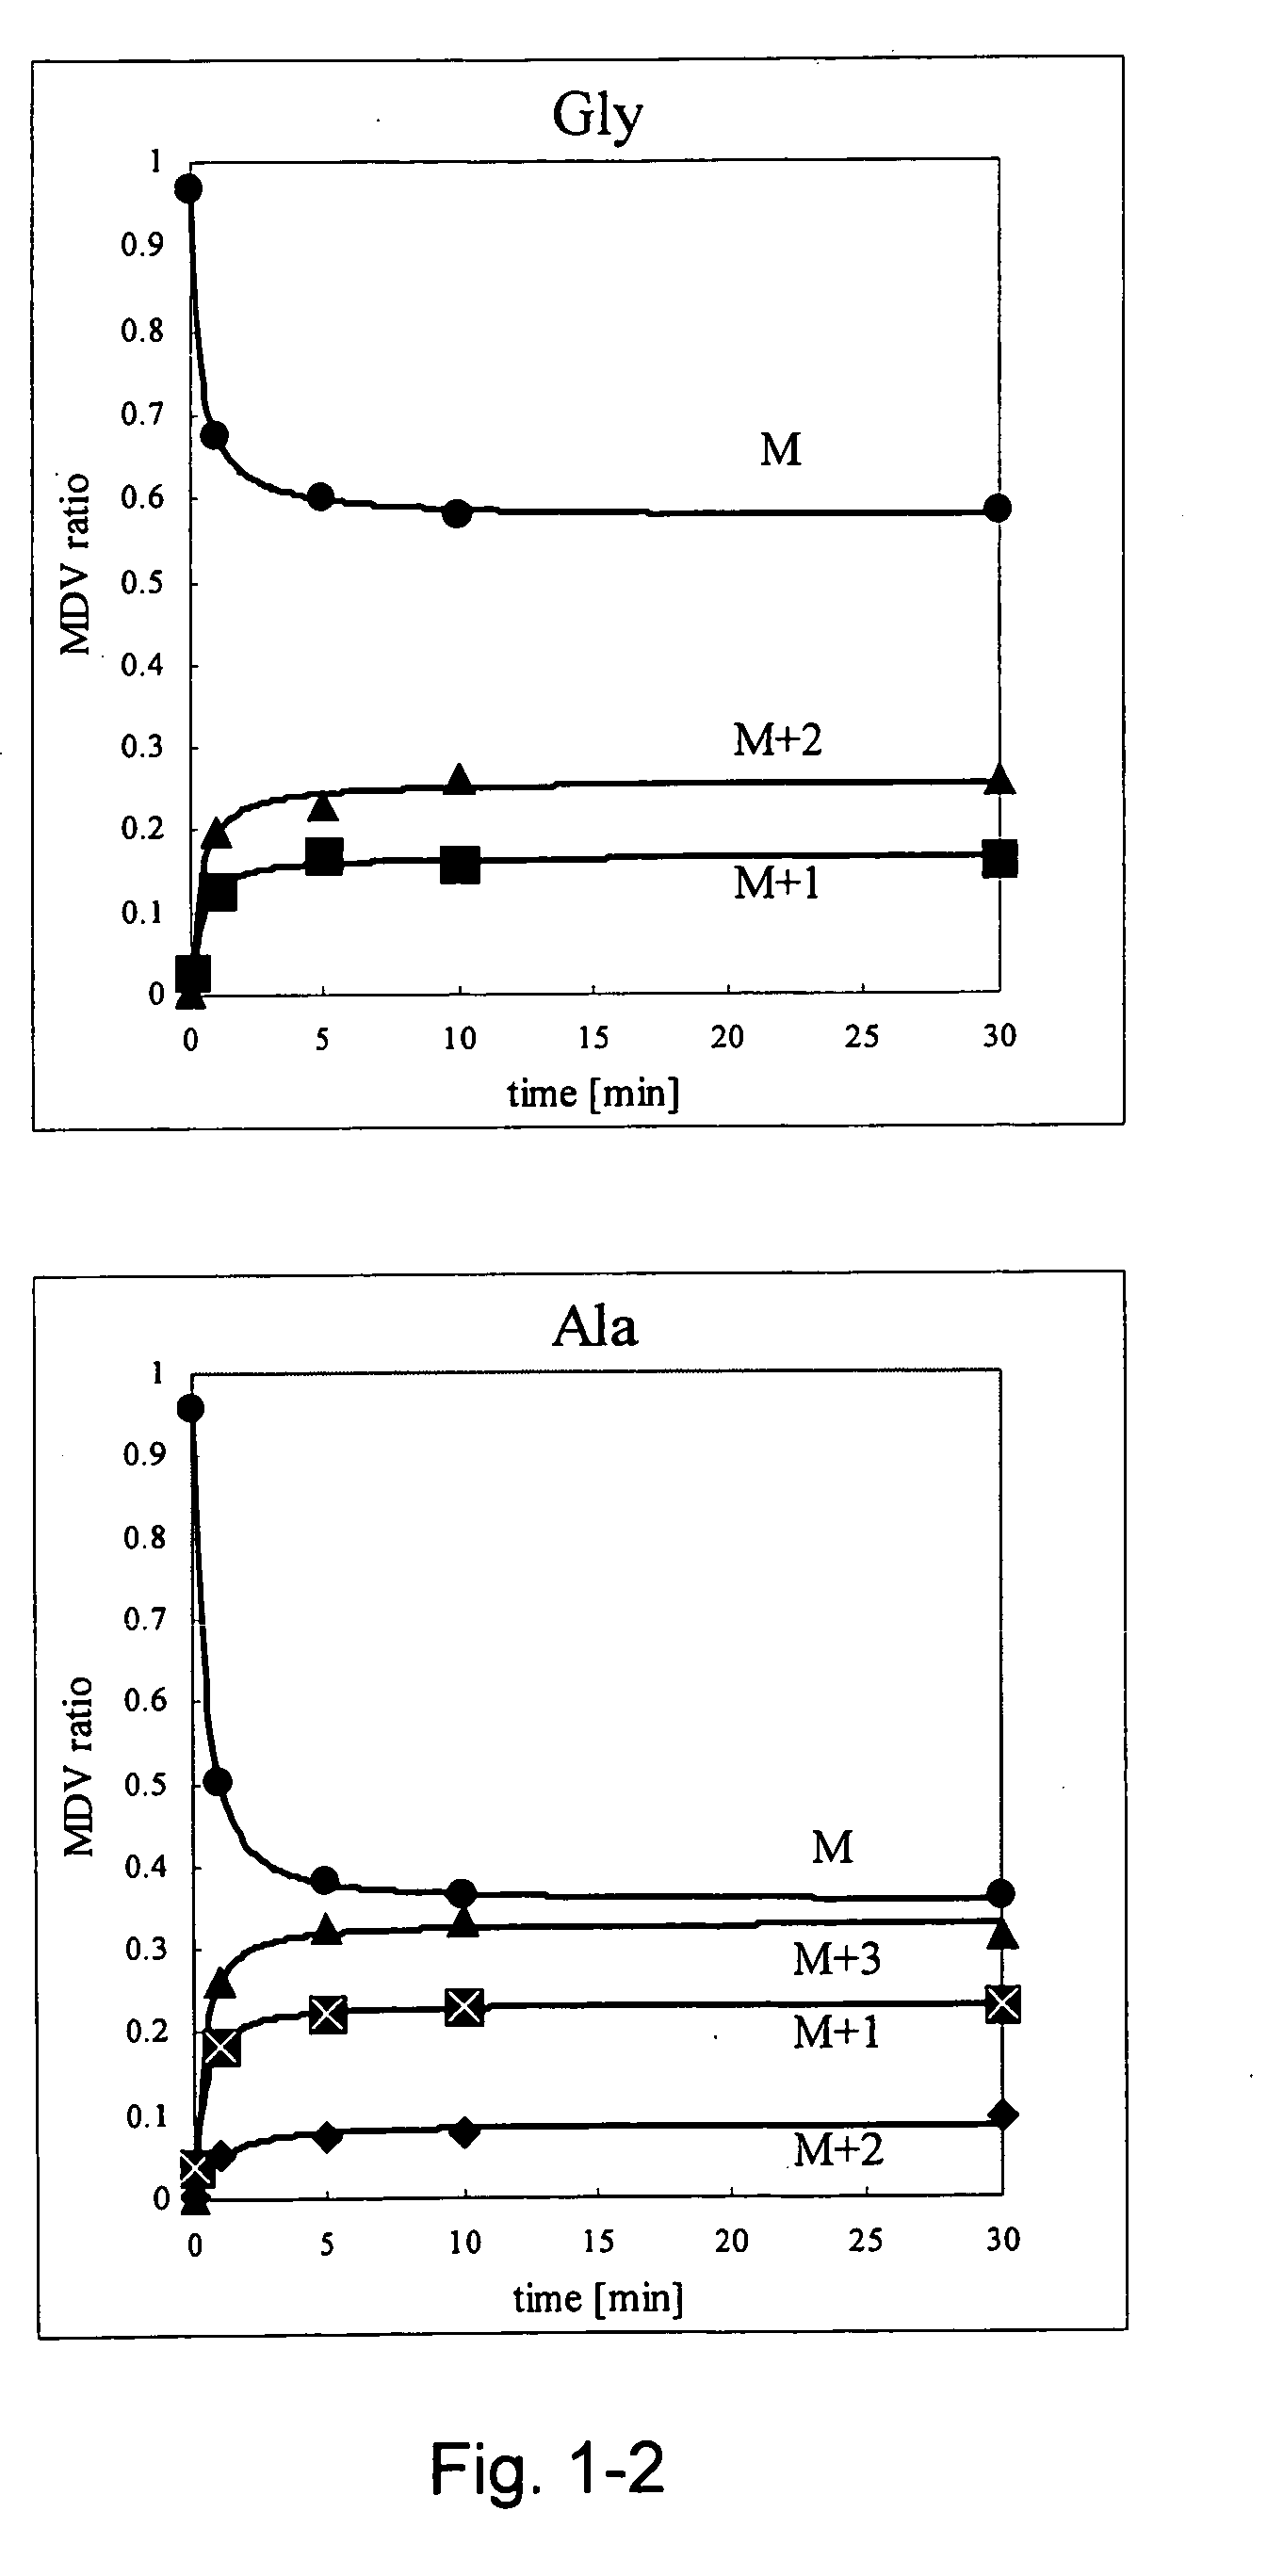 Intracellular metabolic flux analysis method using substrate labeled with isotope